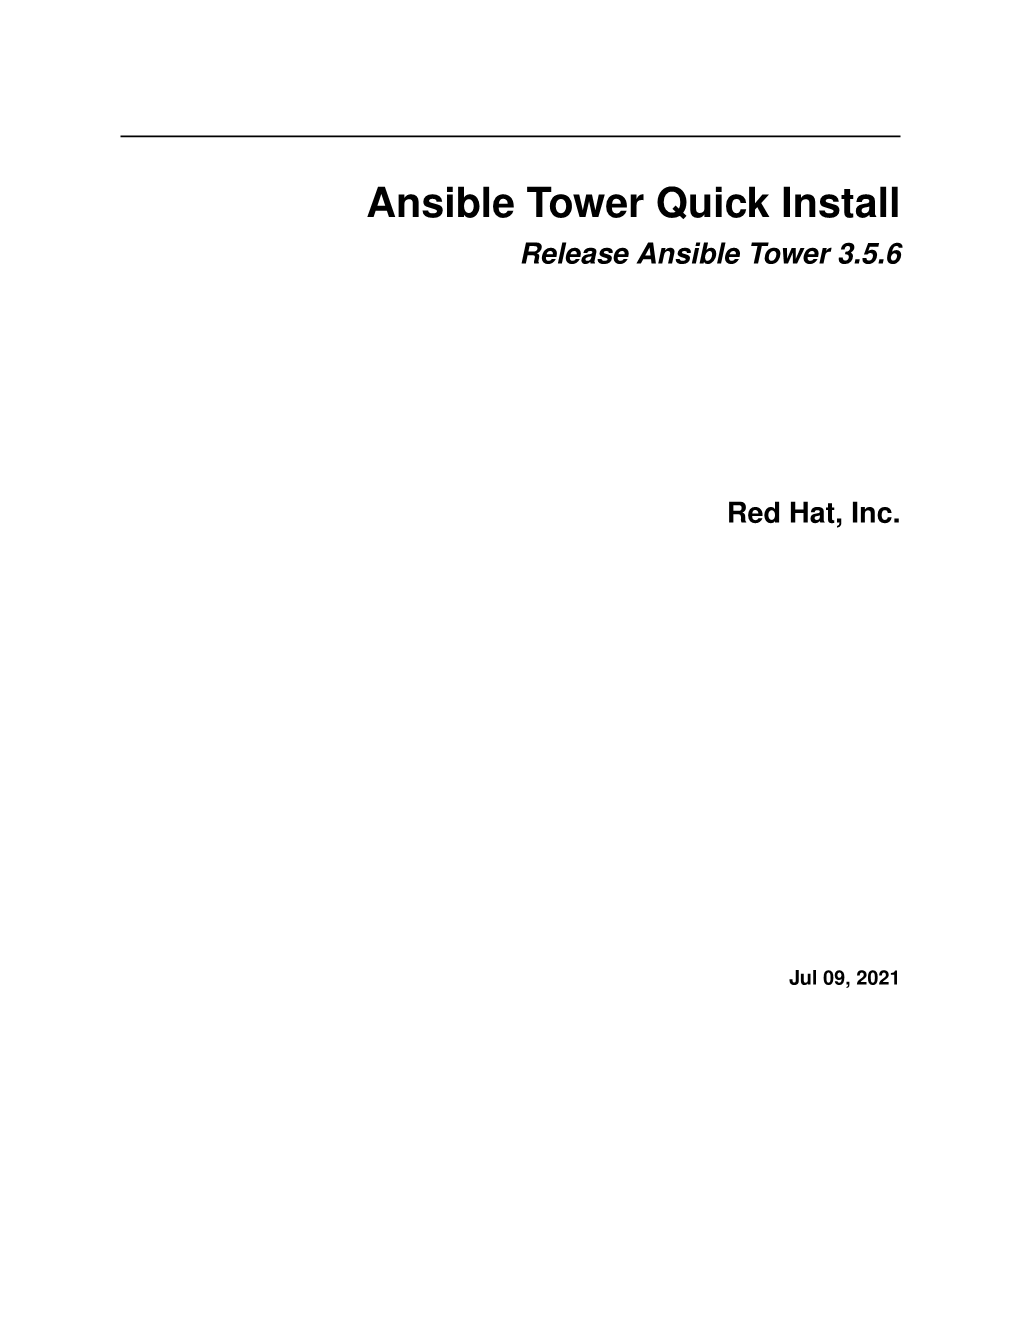 Ansible Tower Quick Install Release Ansible Tower 3.5.6